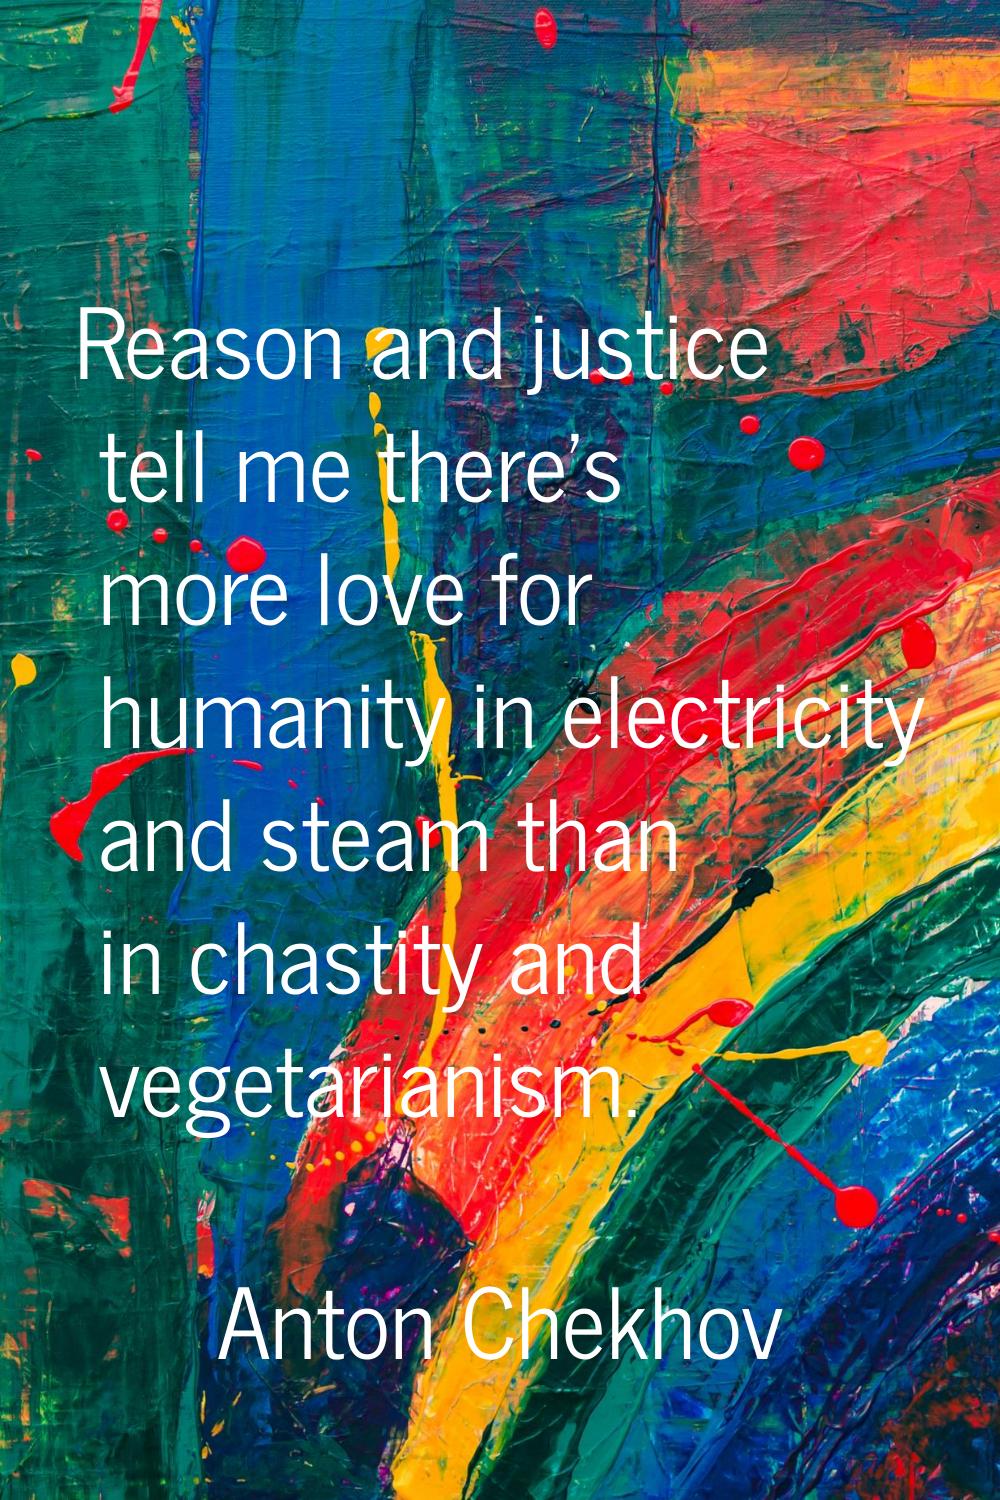 Reason and justice tell me there's more love for humanity in electricity and steam than in chastity